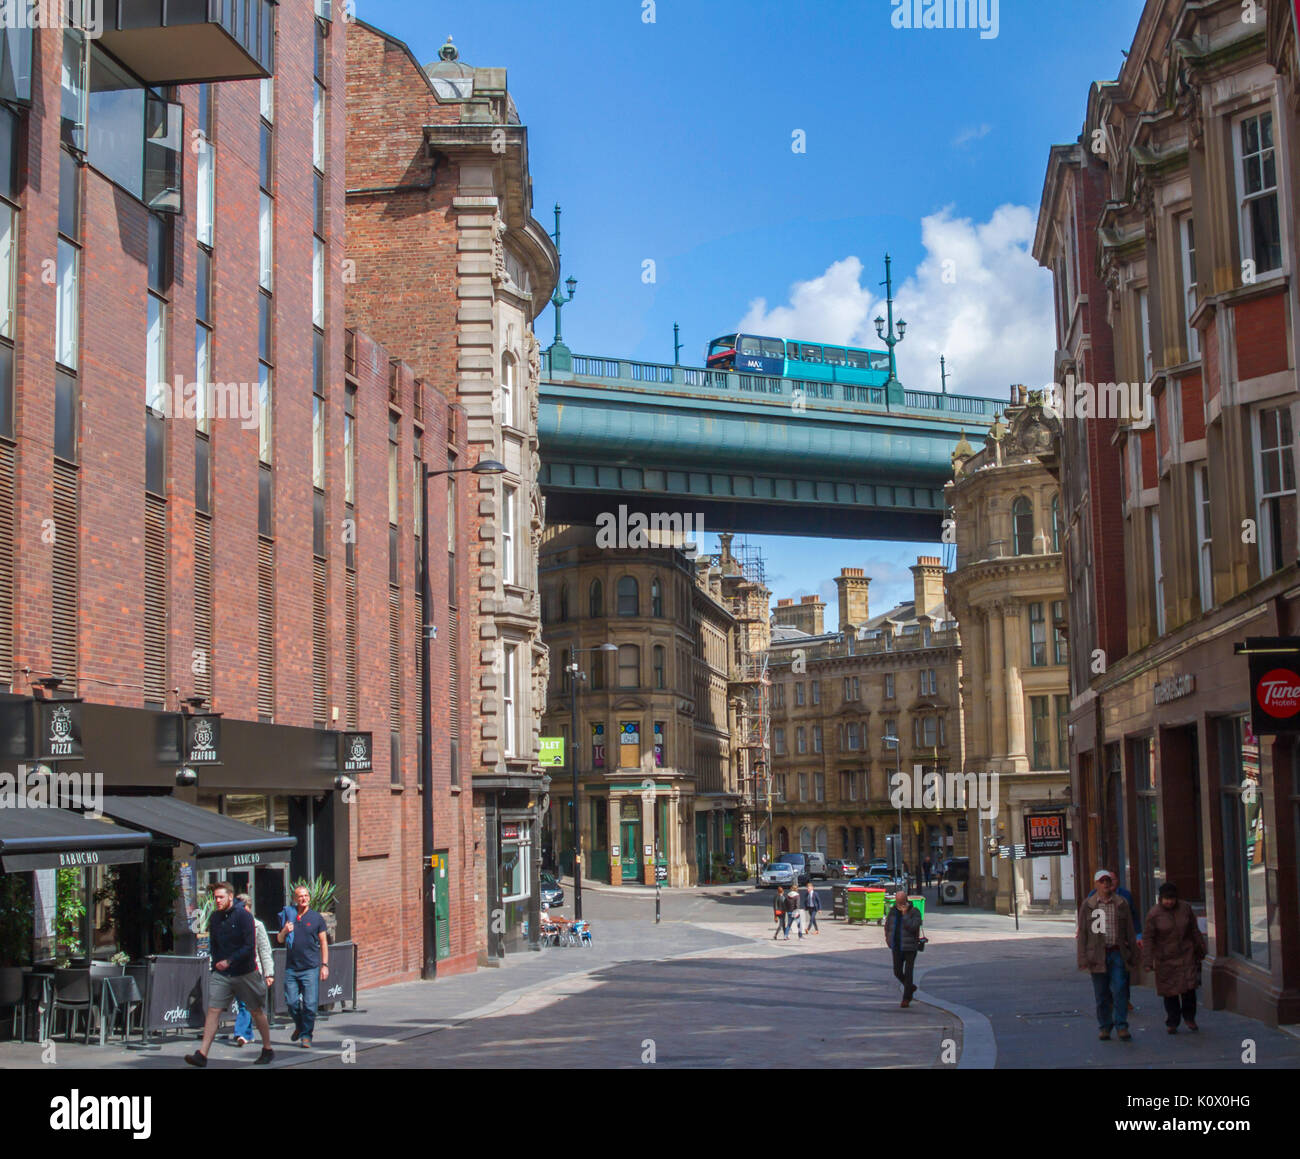 Section of Tyne River bridge and double decker bus passing across tops of city buildings and street under blue sky at Newcastle-upon-Tyne, England Stock Photo